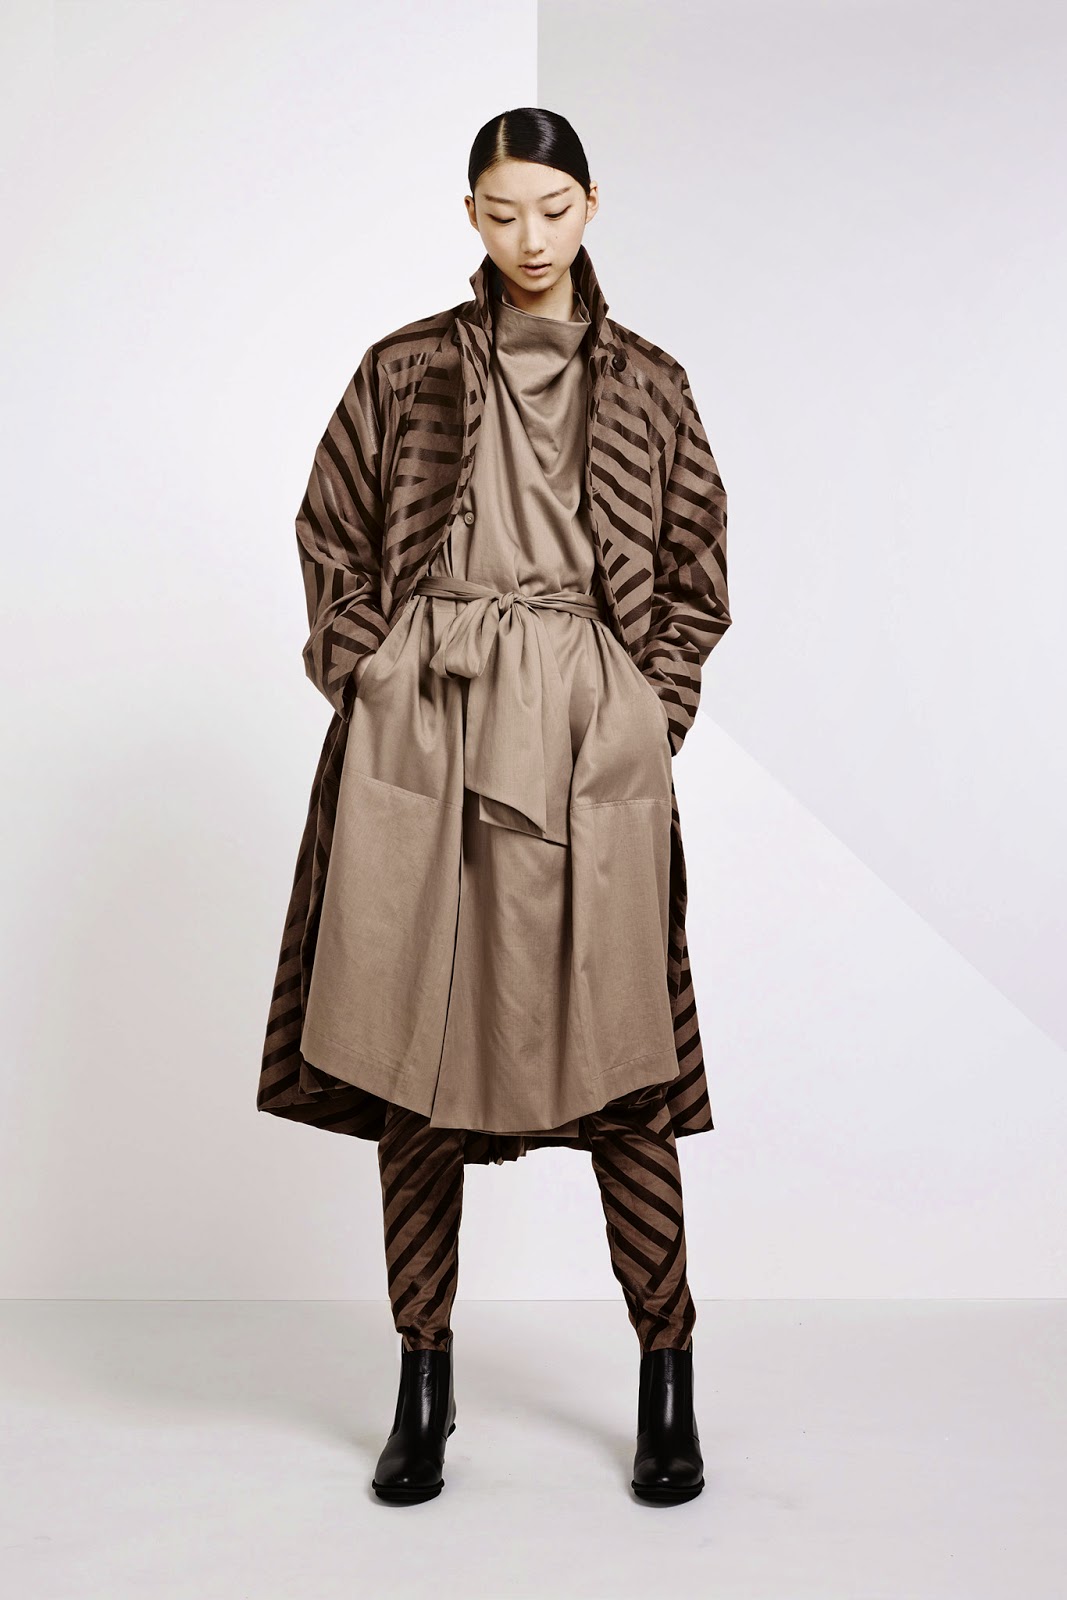 Serendipitylands: ISSEY MIYAKE COLLECTION PRE-FALL 2015